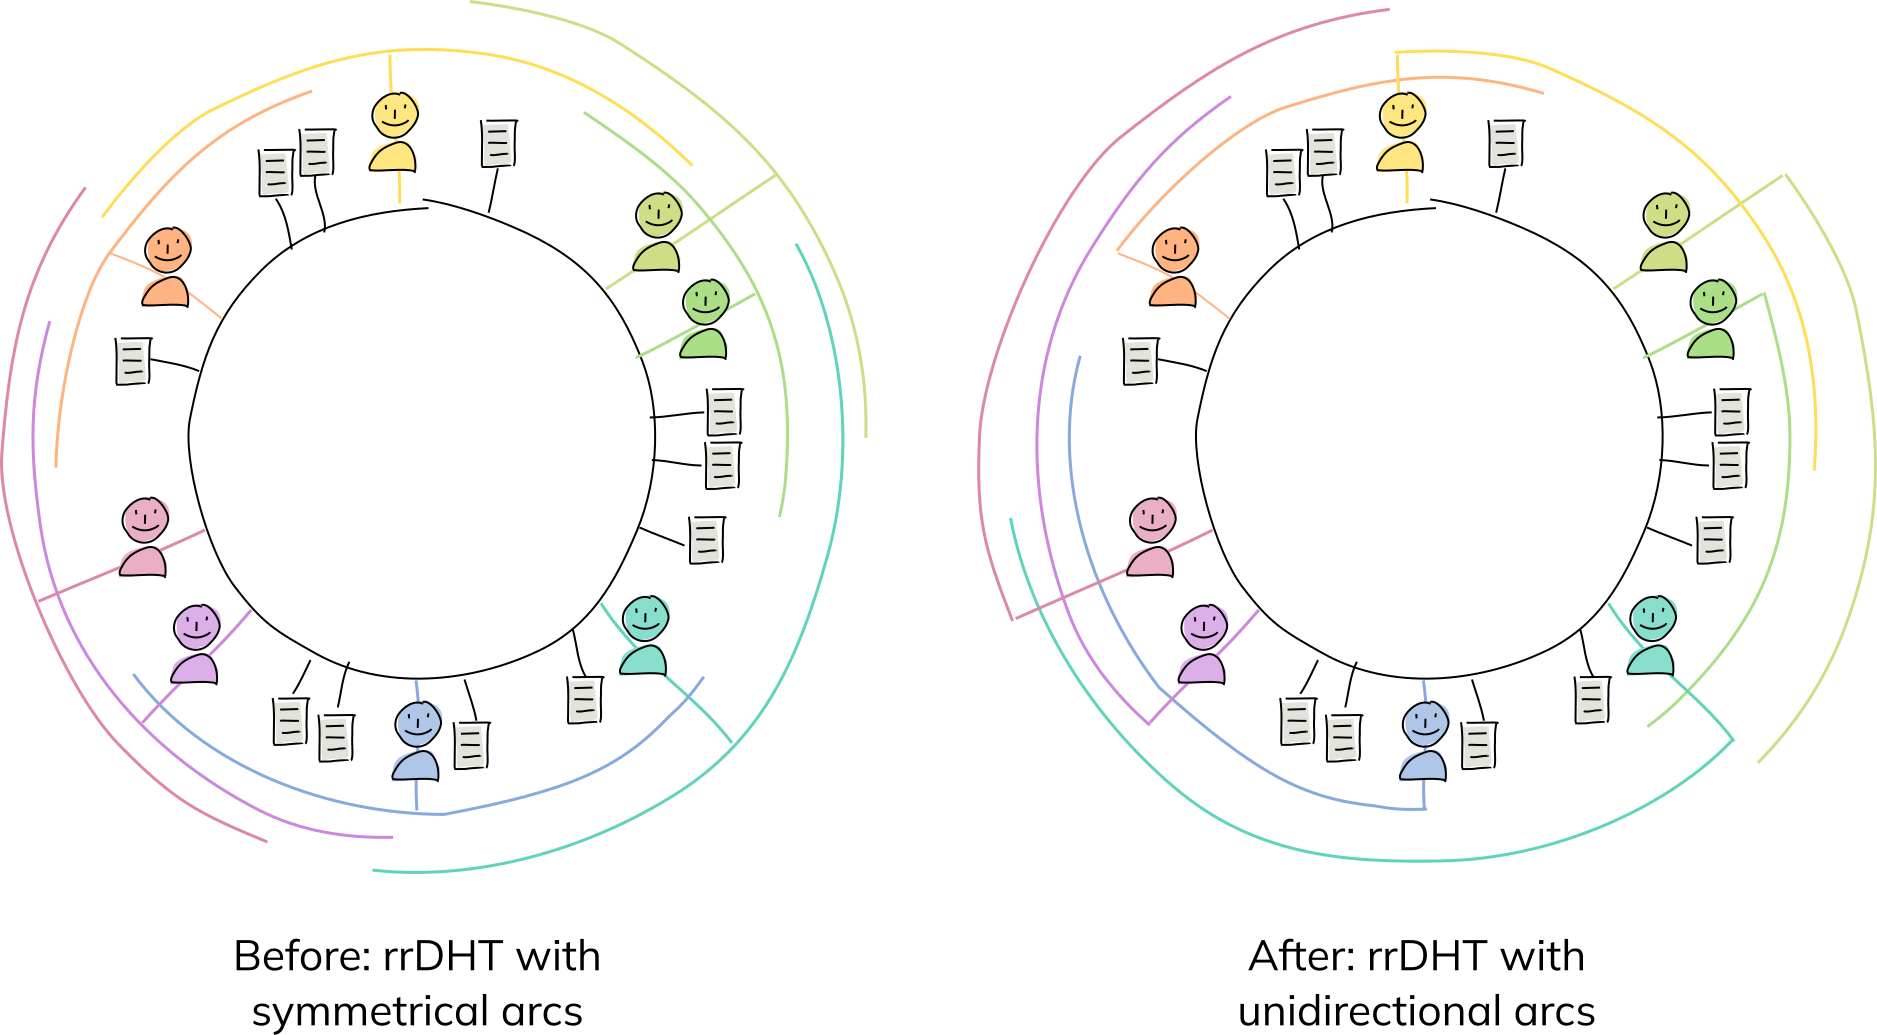 Two DHTs populated with agents and data. One shows symmetrical arcs spreading out in both directions from each agent; the other shows unidirectional arcs spreading out clockwise from each agent.